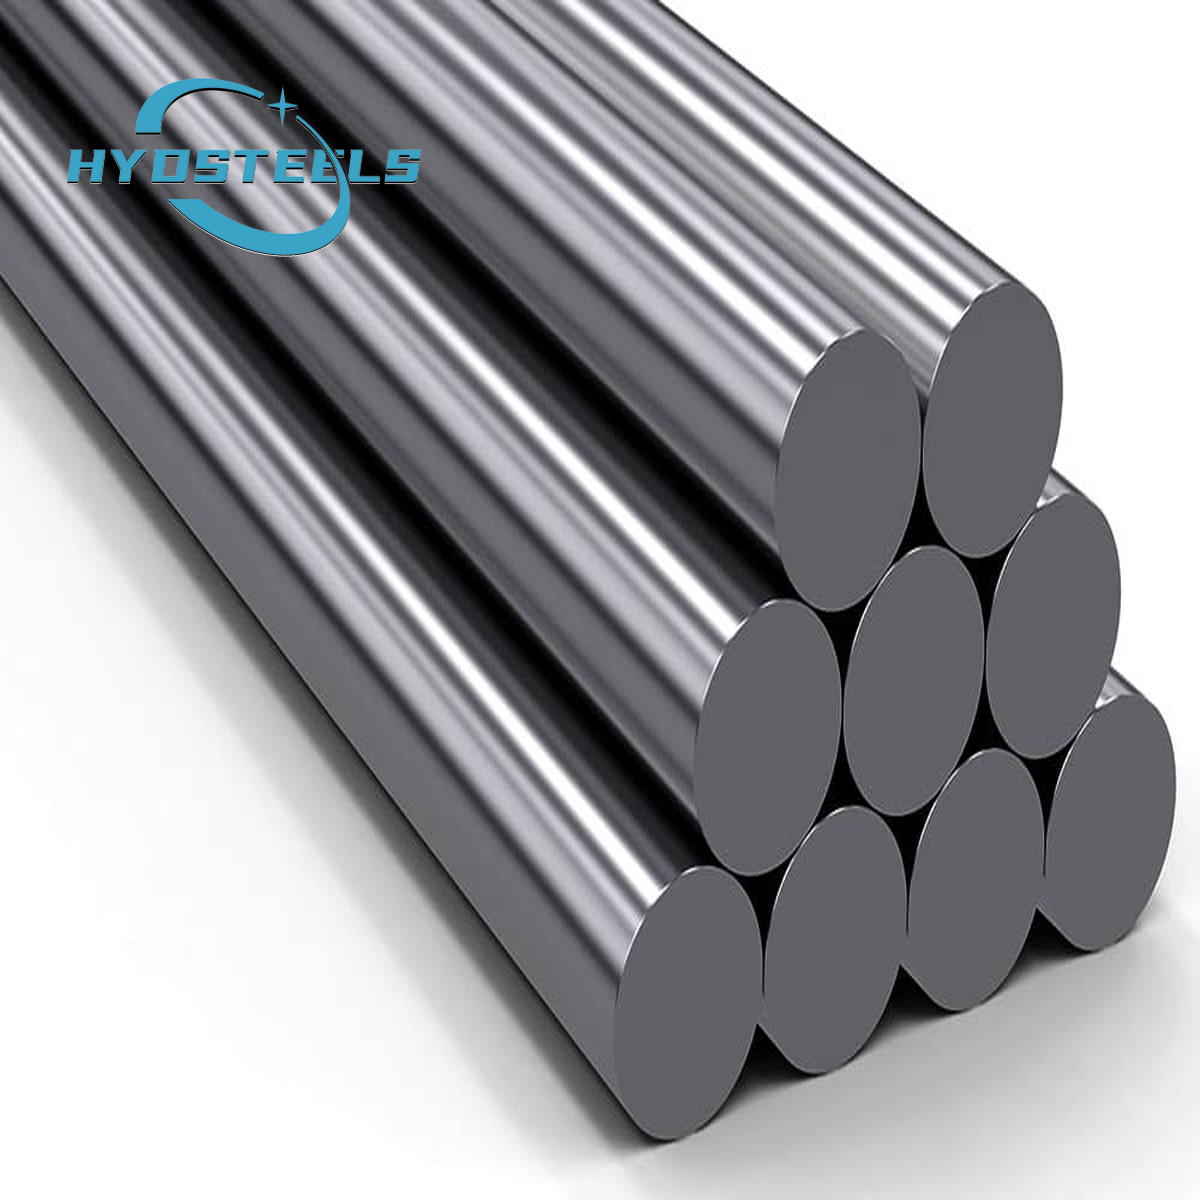 CK45 Hard Chrome Plated Rod for Hydraulic Cylinder Suppliers